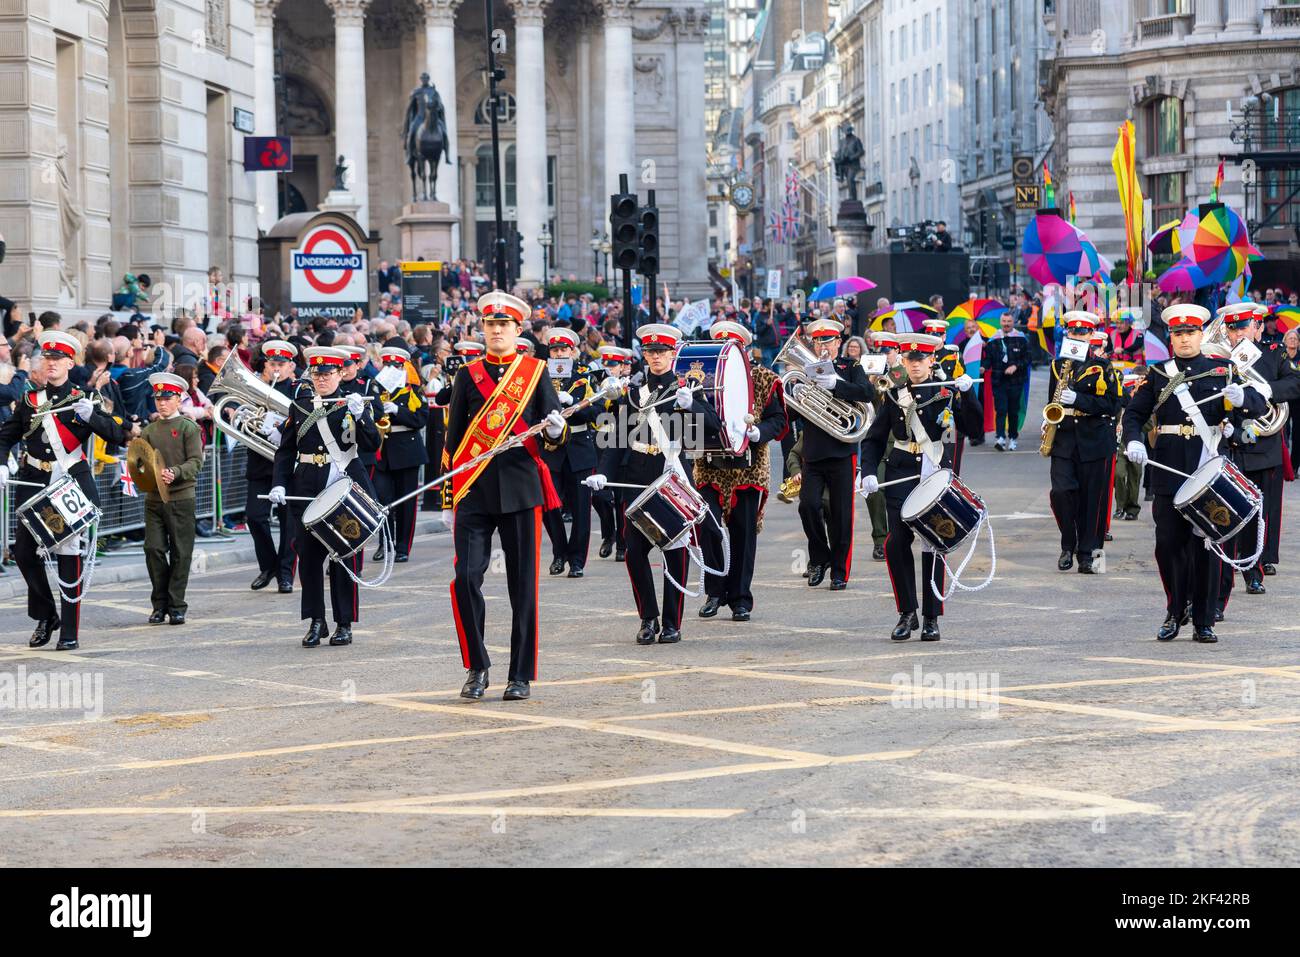 SURBITON RBL YOUTH MARCHING BAND at the Lord Mayor's Show parade in the City of London, UK Stock Photo